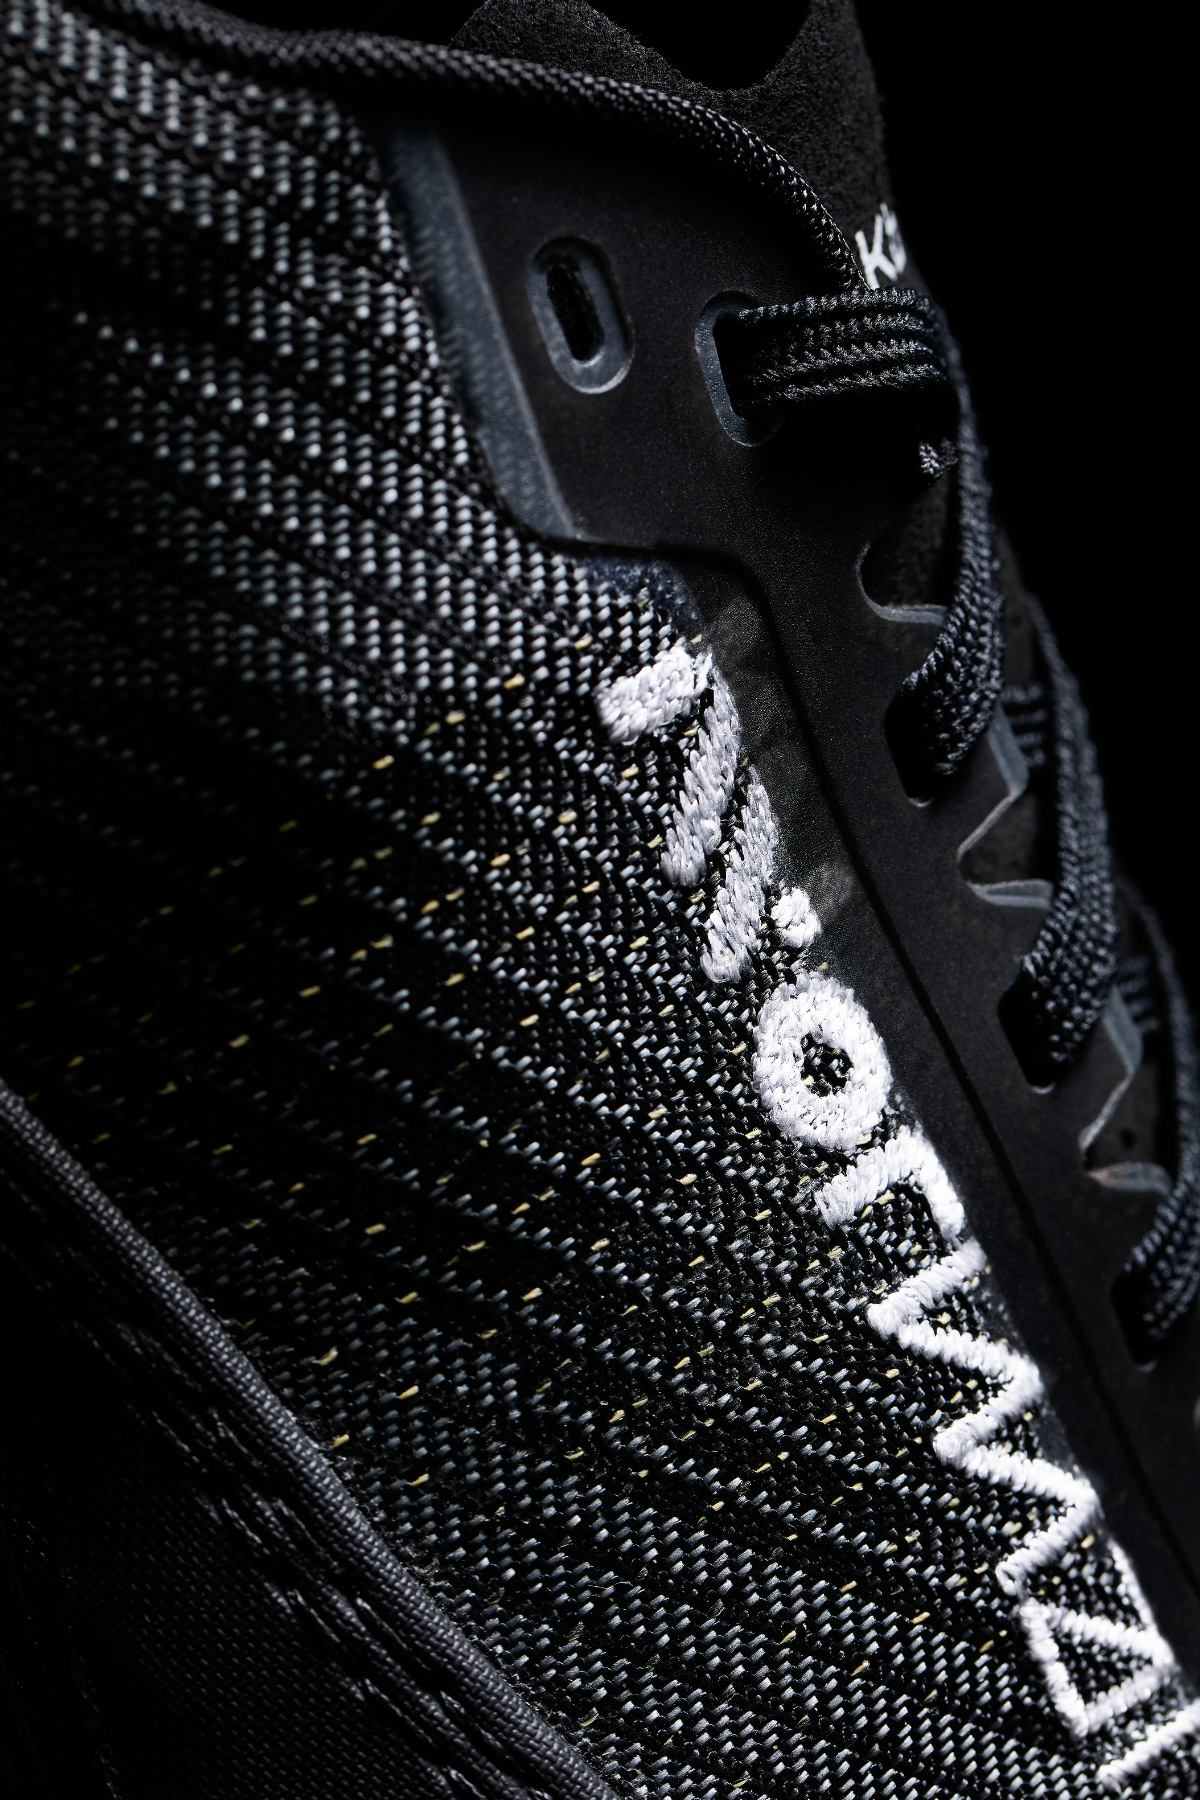 Nnormal's new modular sneakers are the future of footwear.